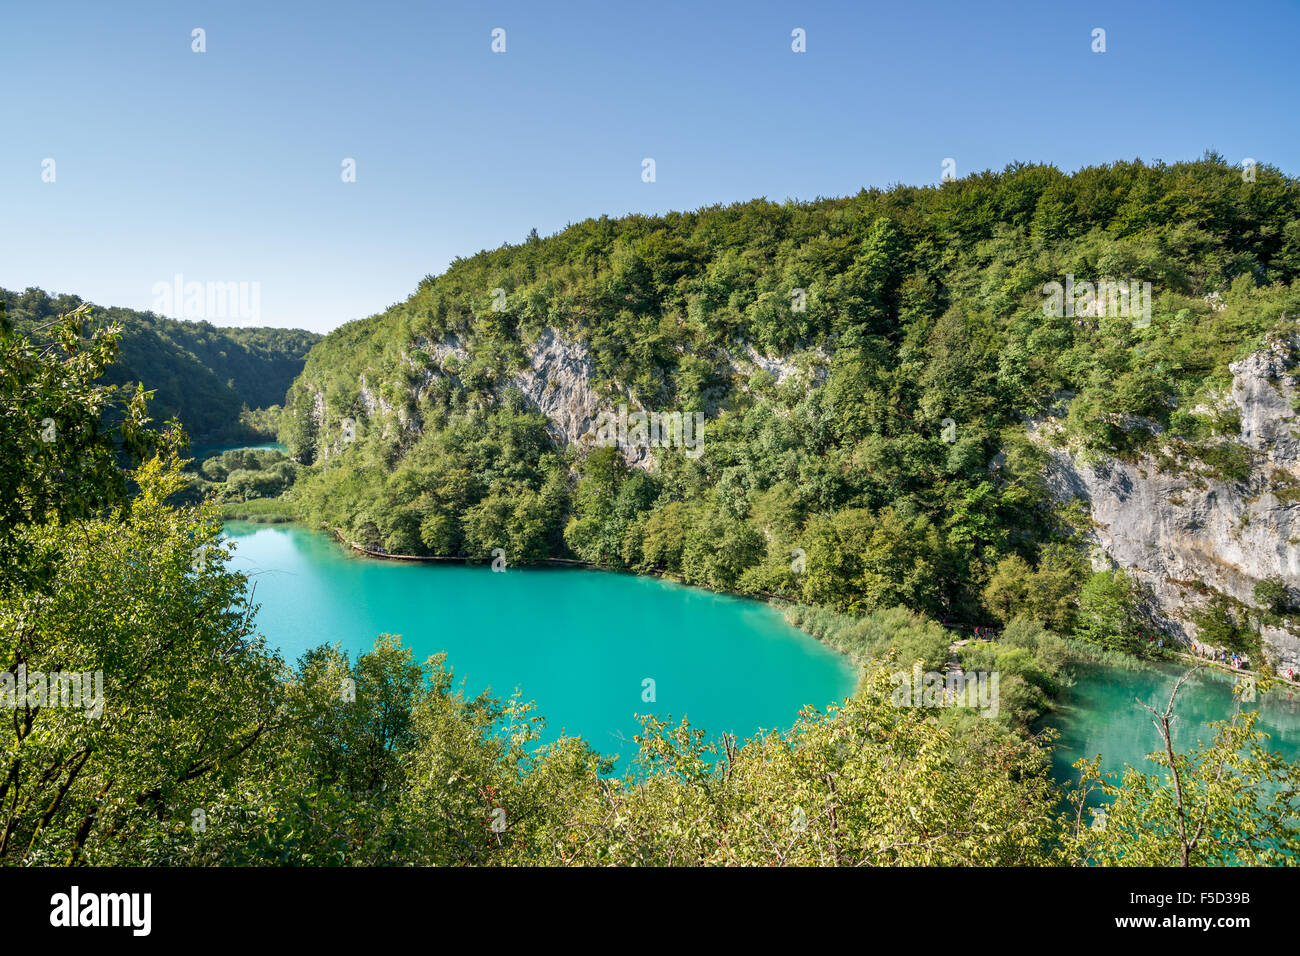 Lower Lakes at Plitvice National Park in Croatia Stock Photo